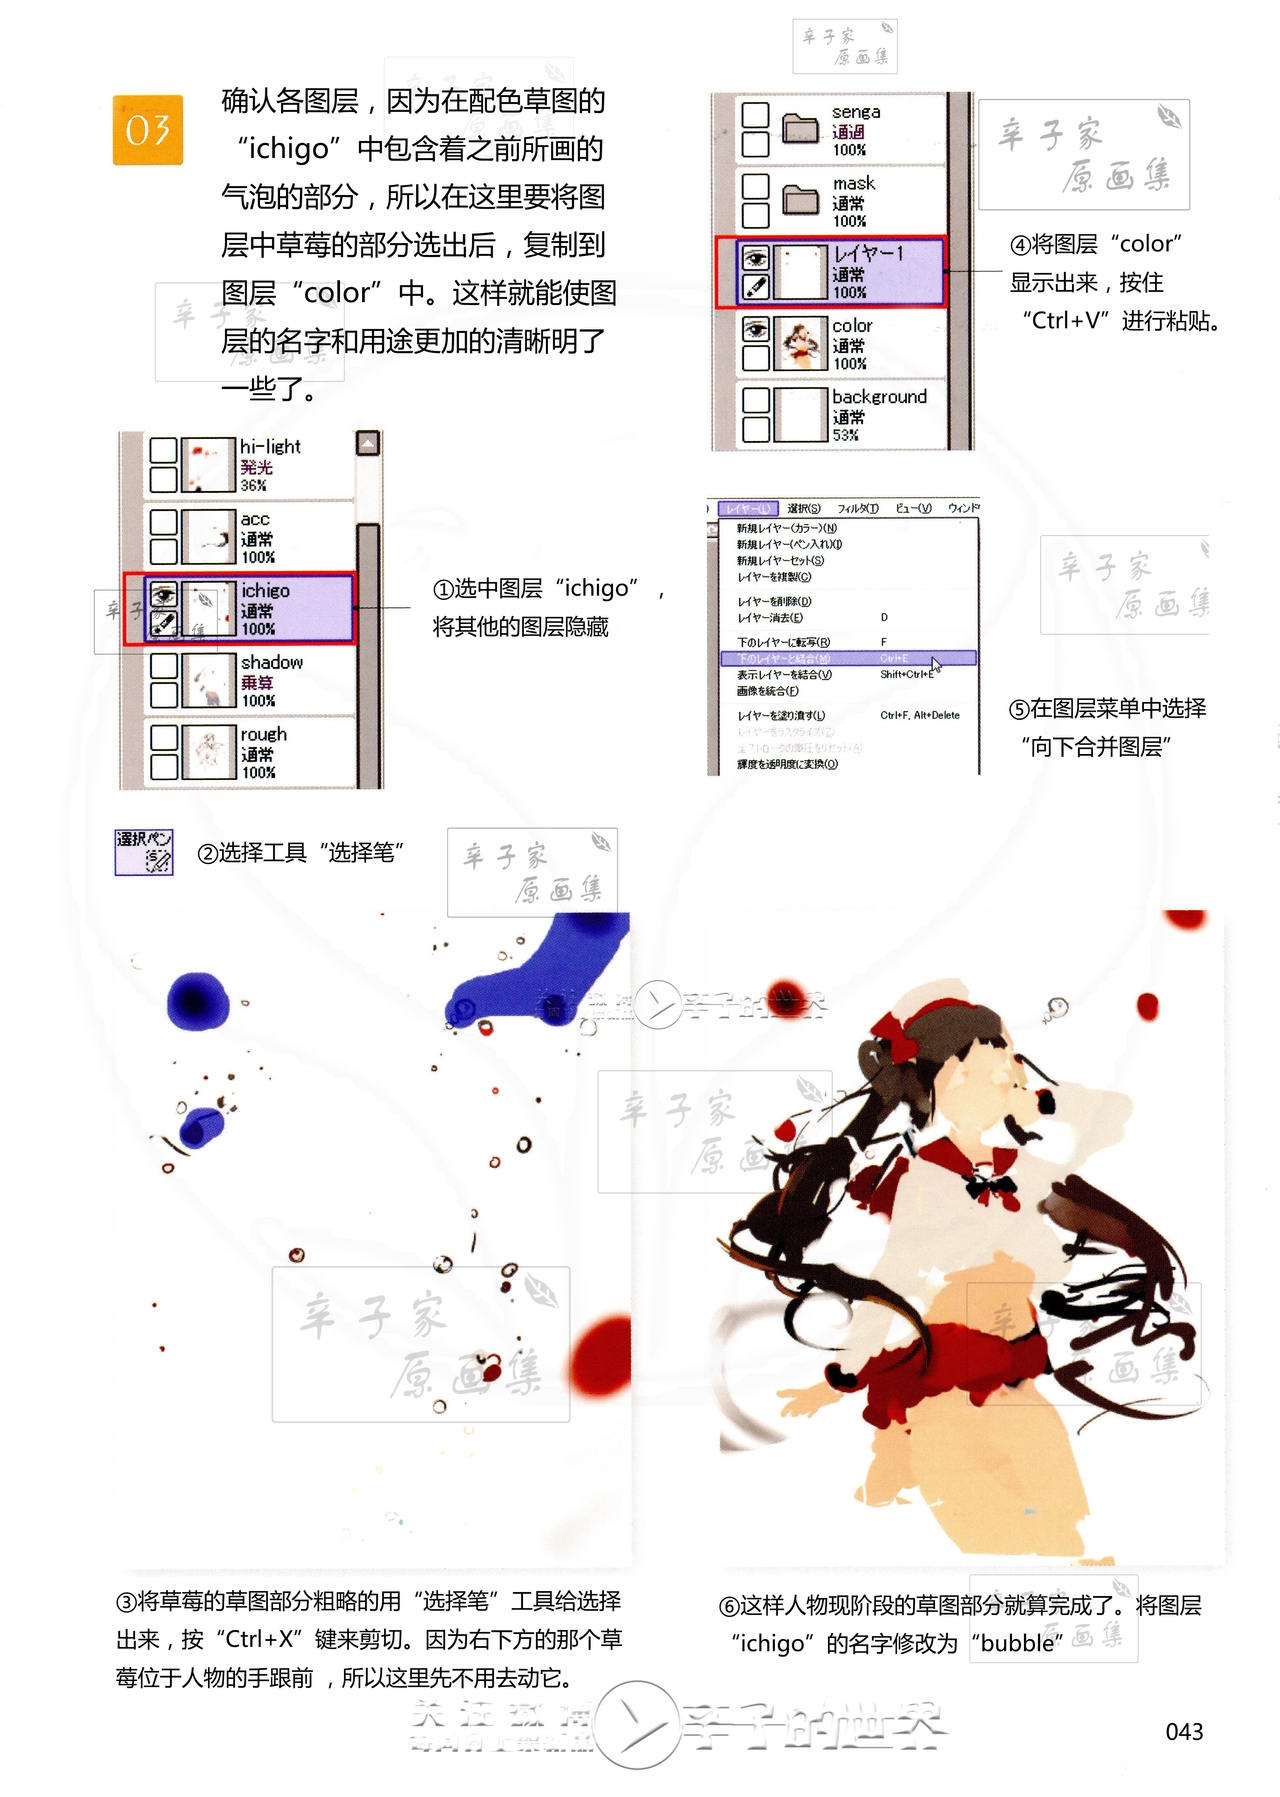 [Anmi] Lets Make ★ Character CG illustration techniques vol.9 [Chinese] 41